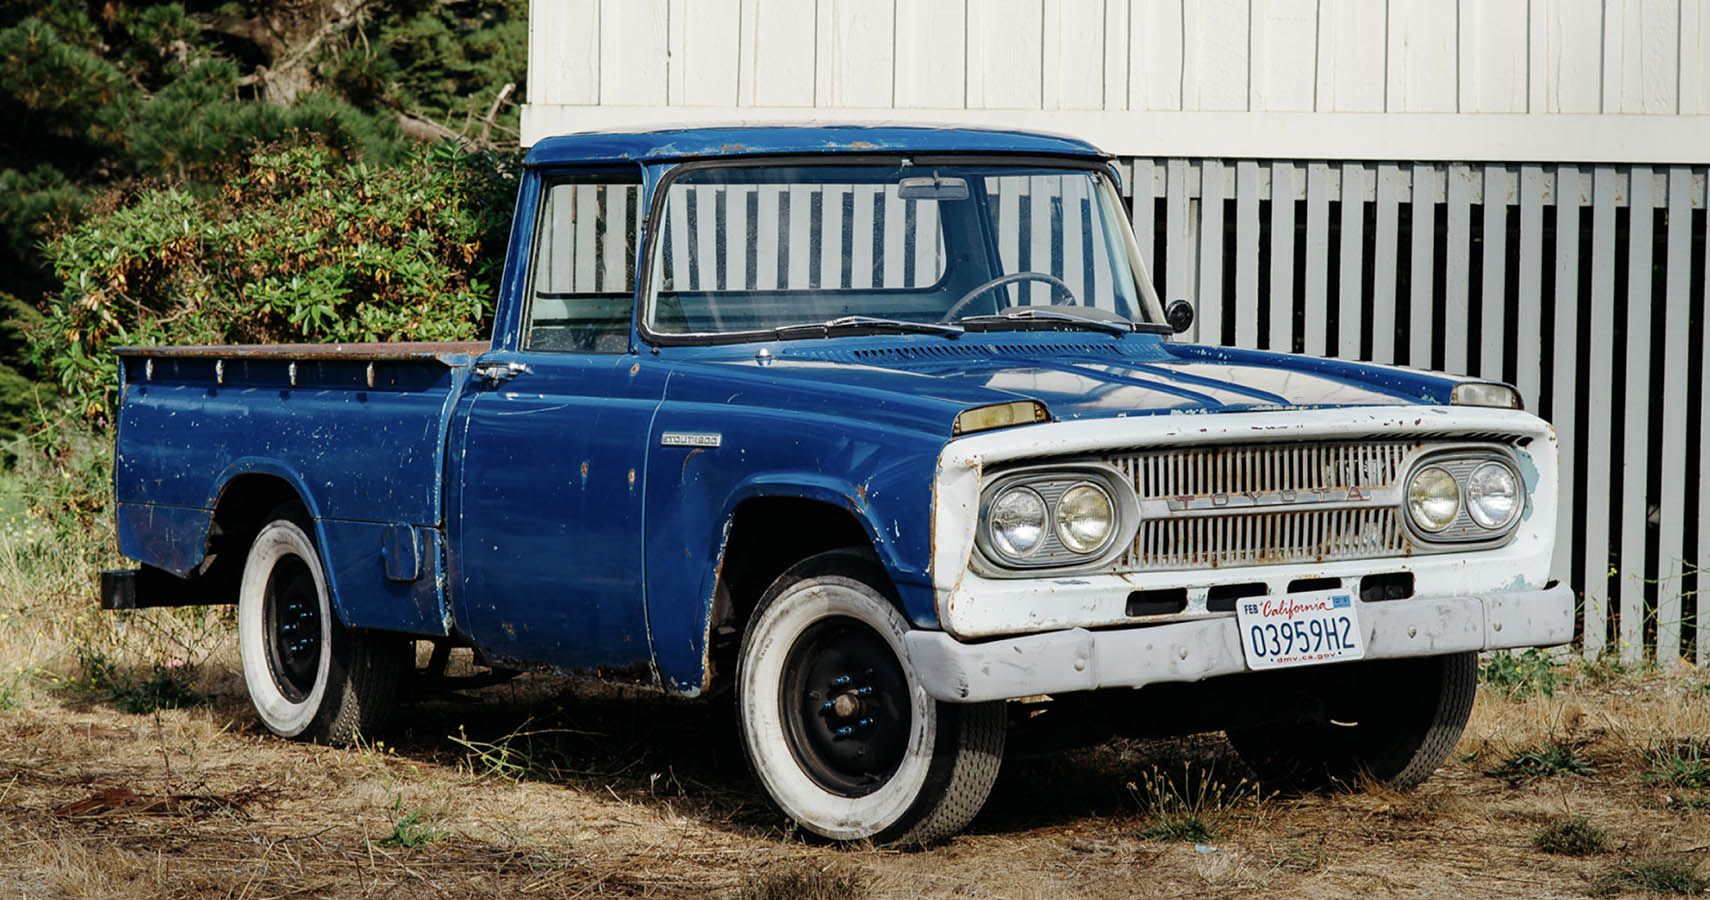 Toyota’s First Trucks Started To Trickle Into The US In The ‘60s With The First One Named, Stout